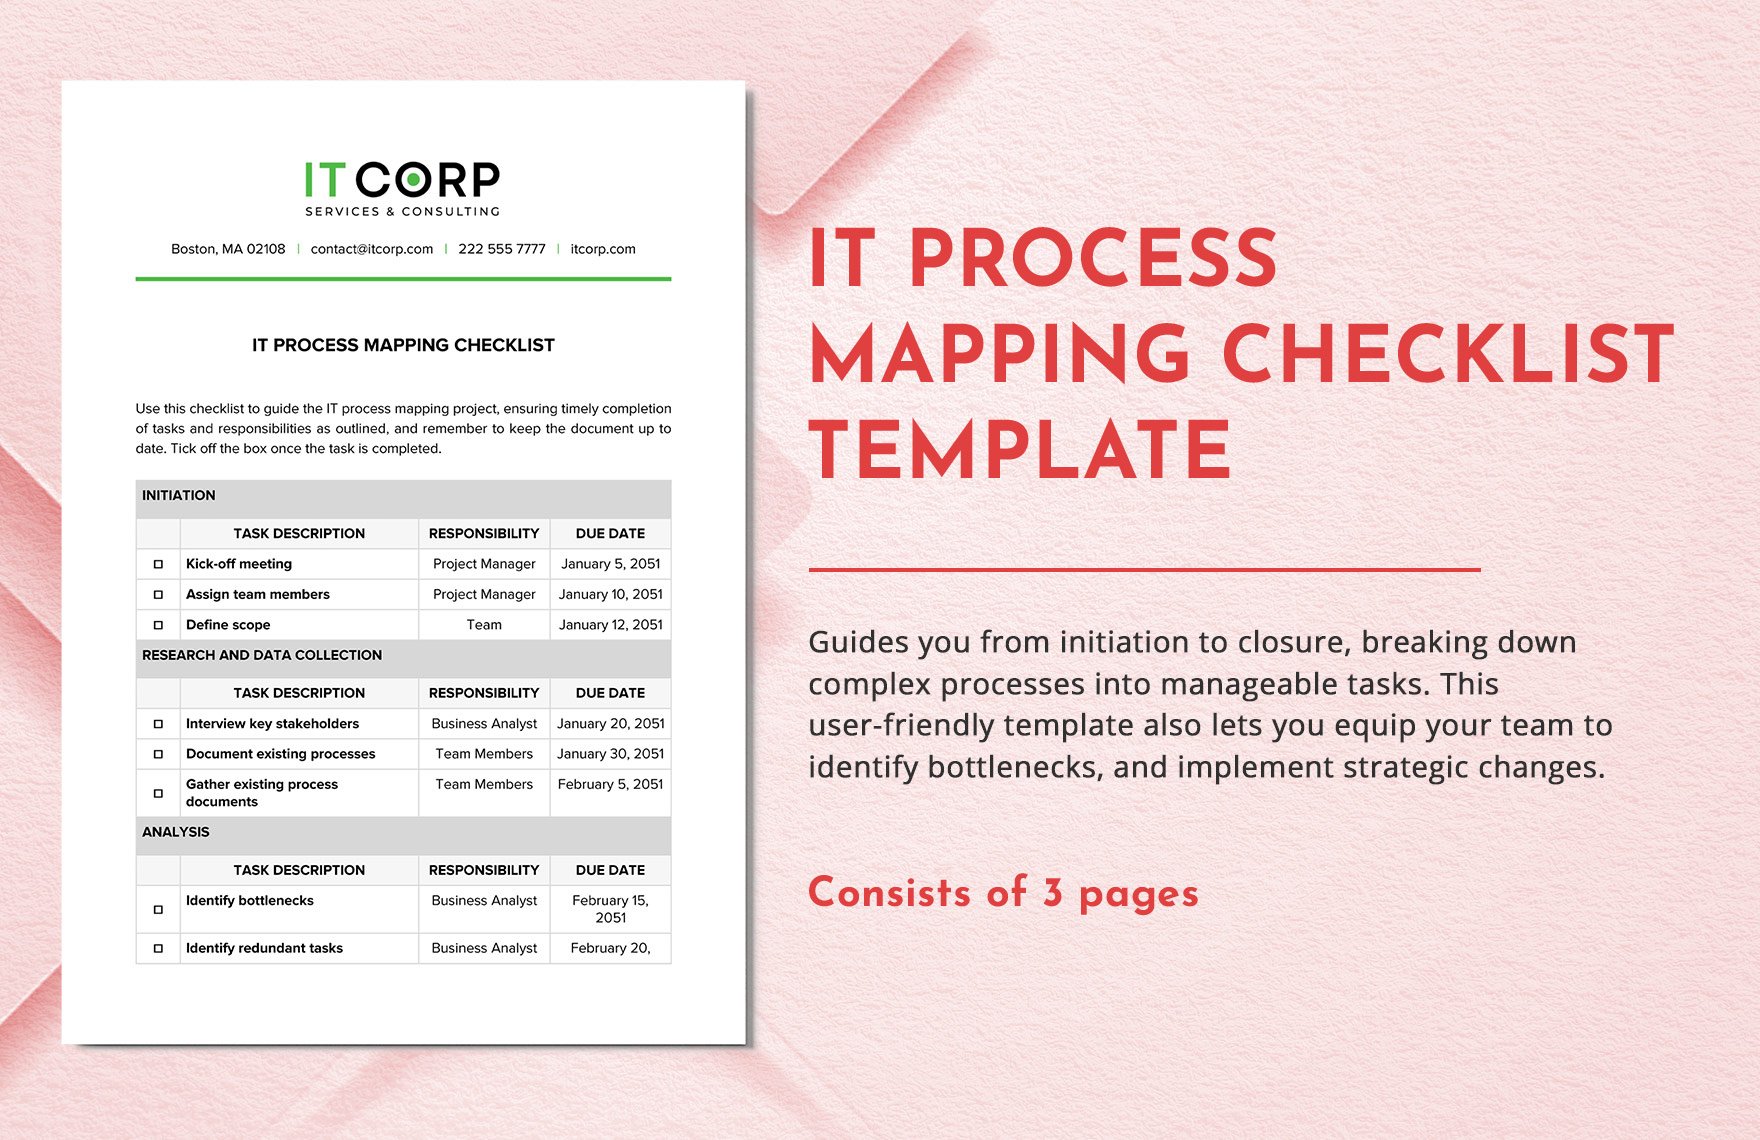 IT Process Mapping Checklist Template